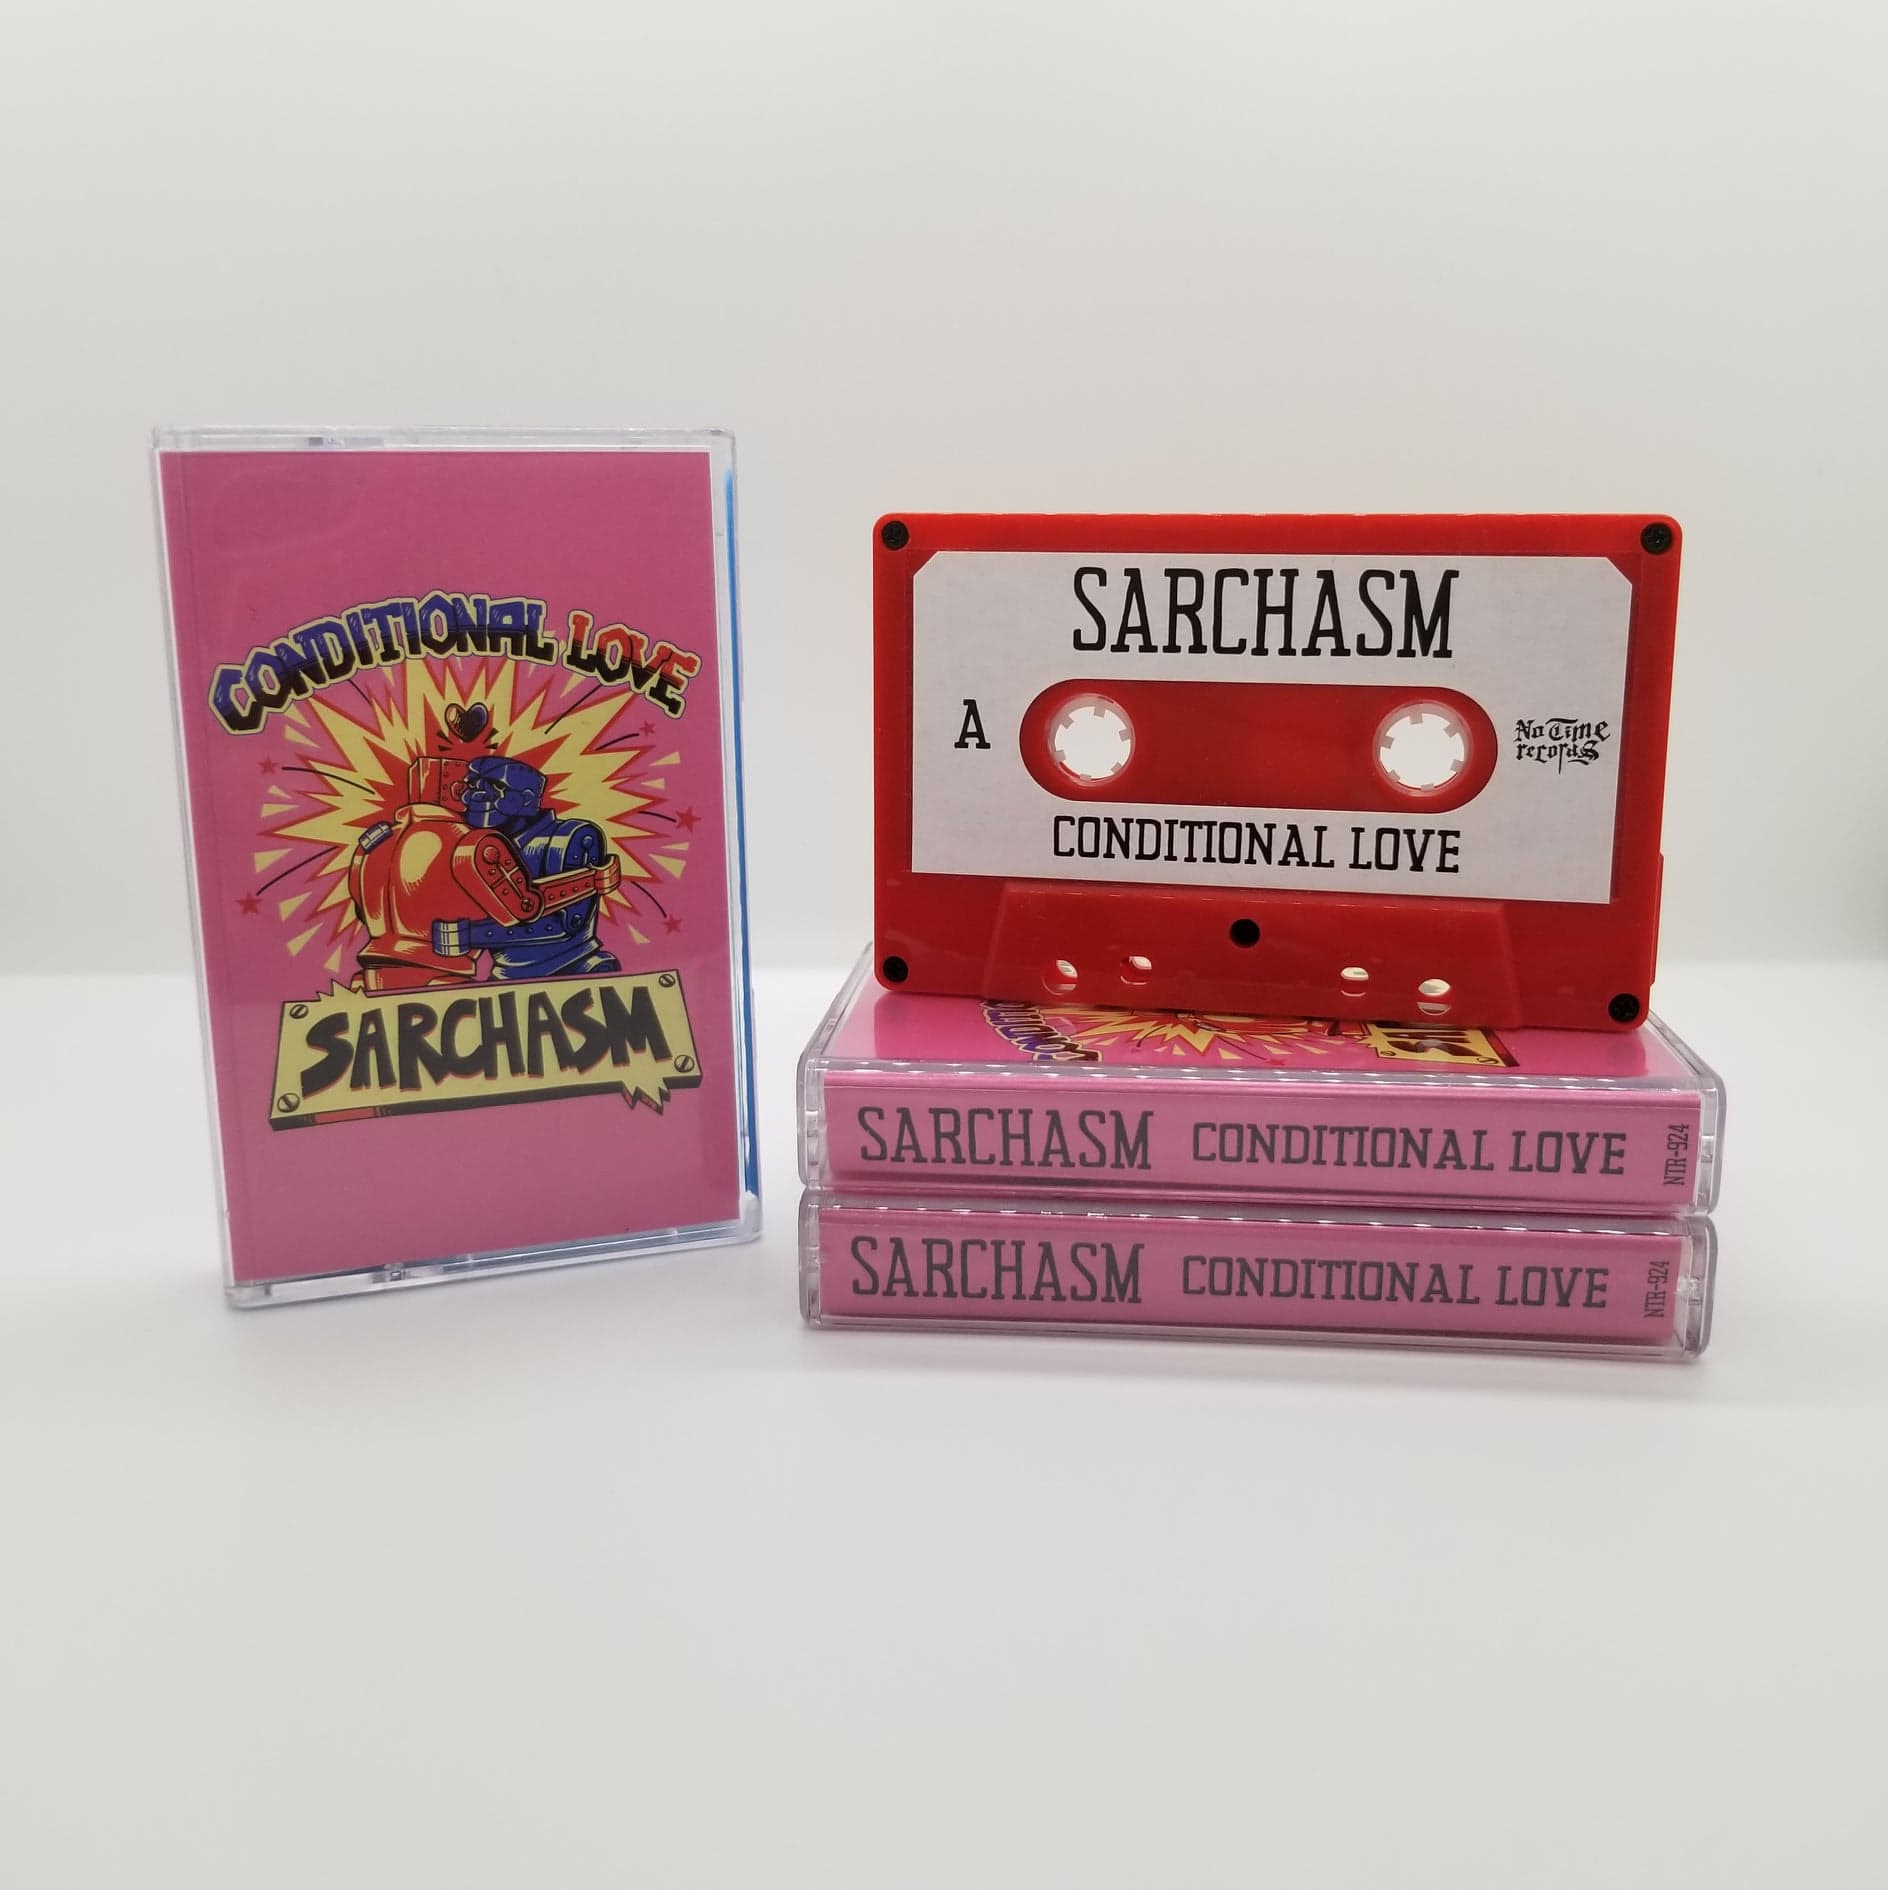 Sarchasm - Conditional Love Cassette - Red